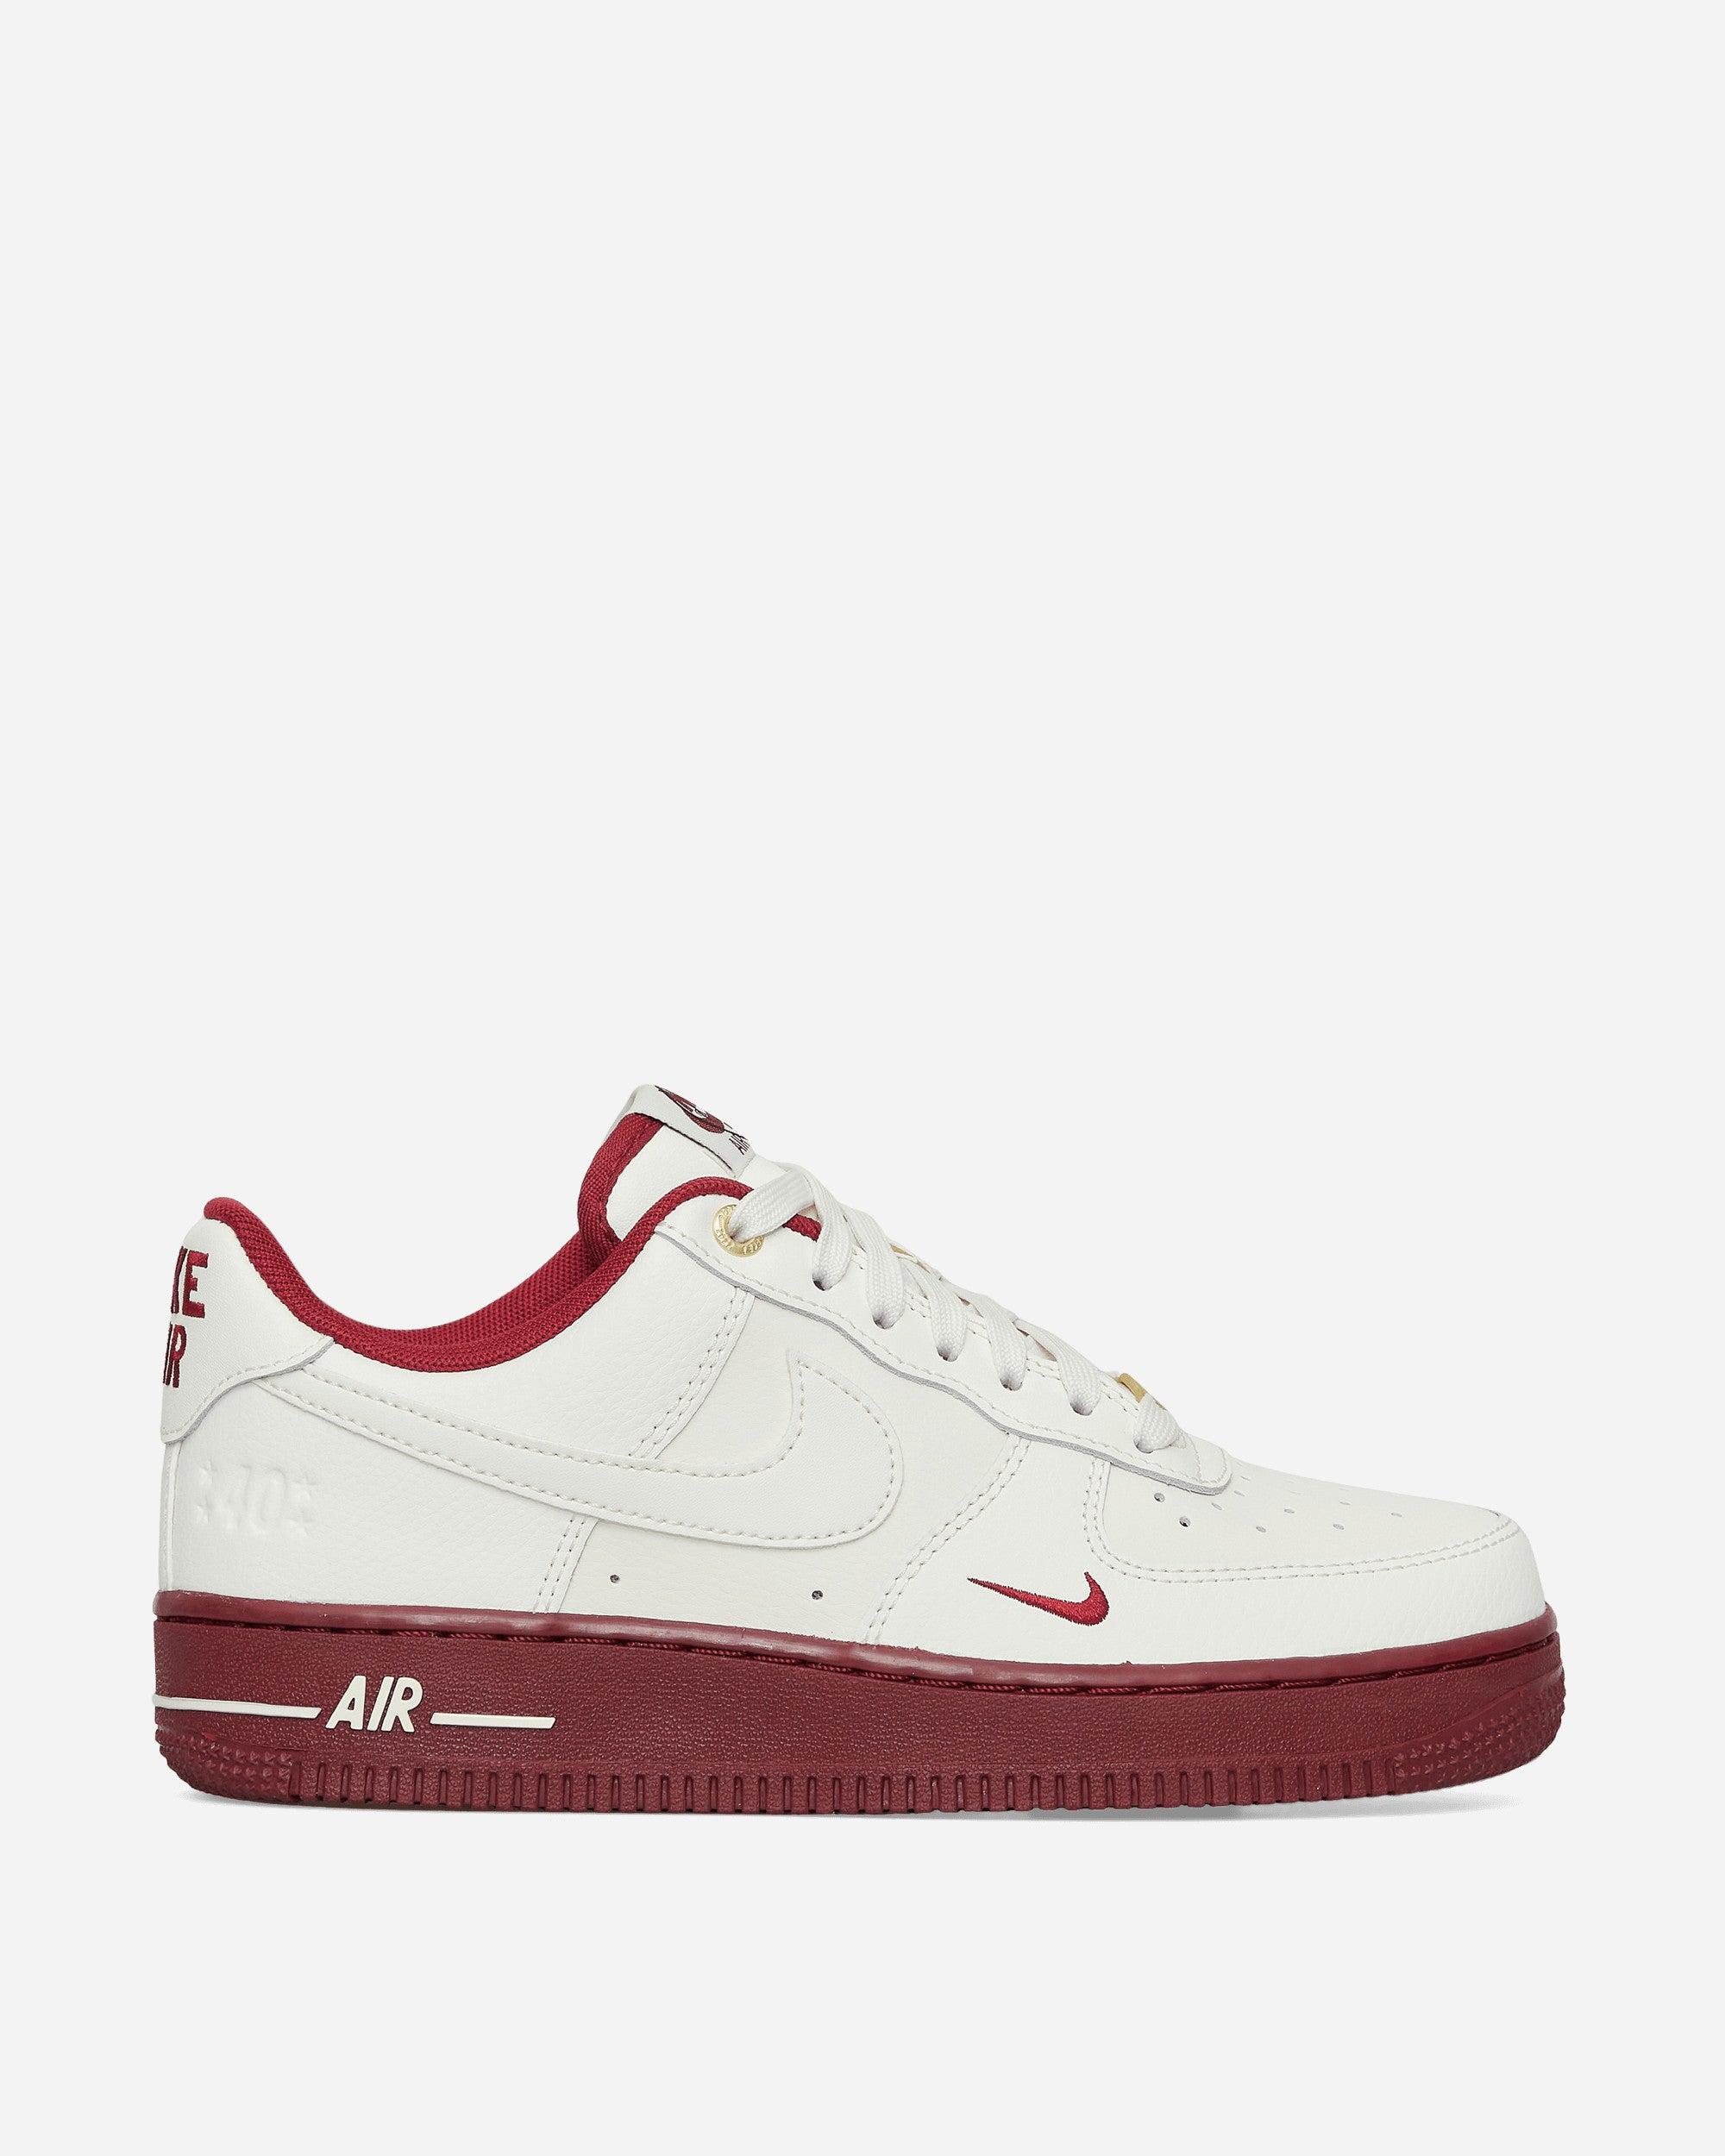 Nike Wmns Air Force 1 '07 Se Sneakers Sail / Team Red in White | Lyst